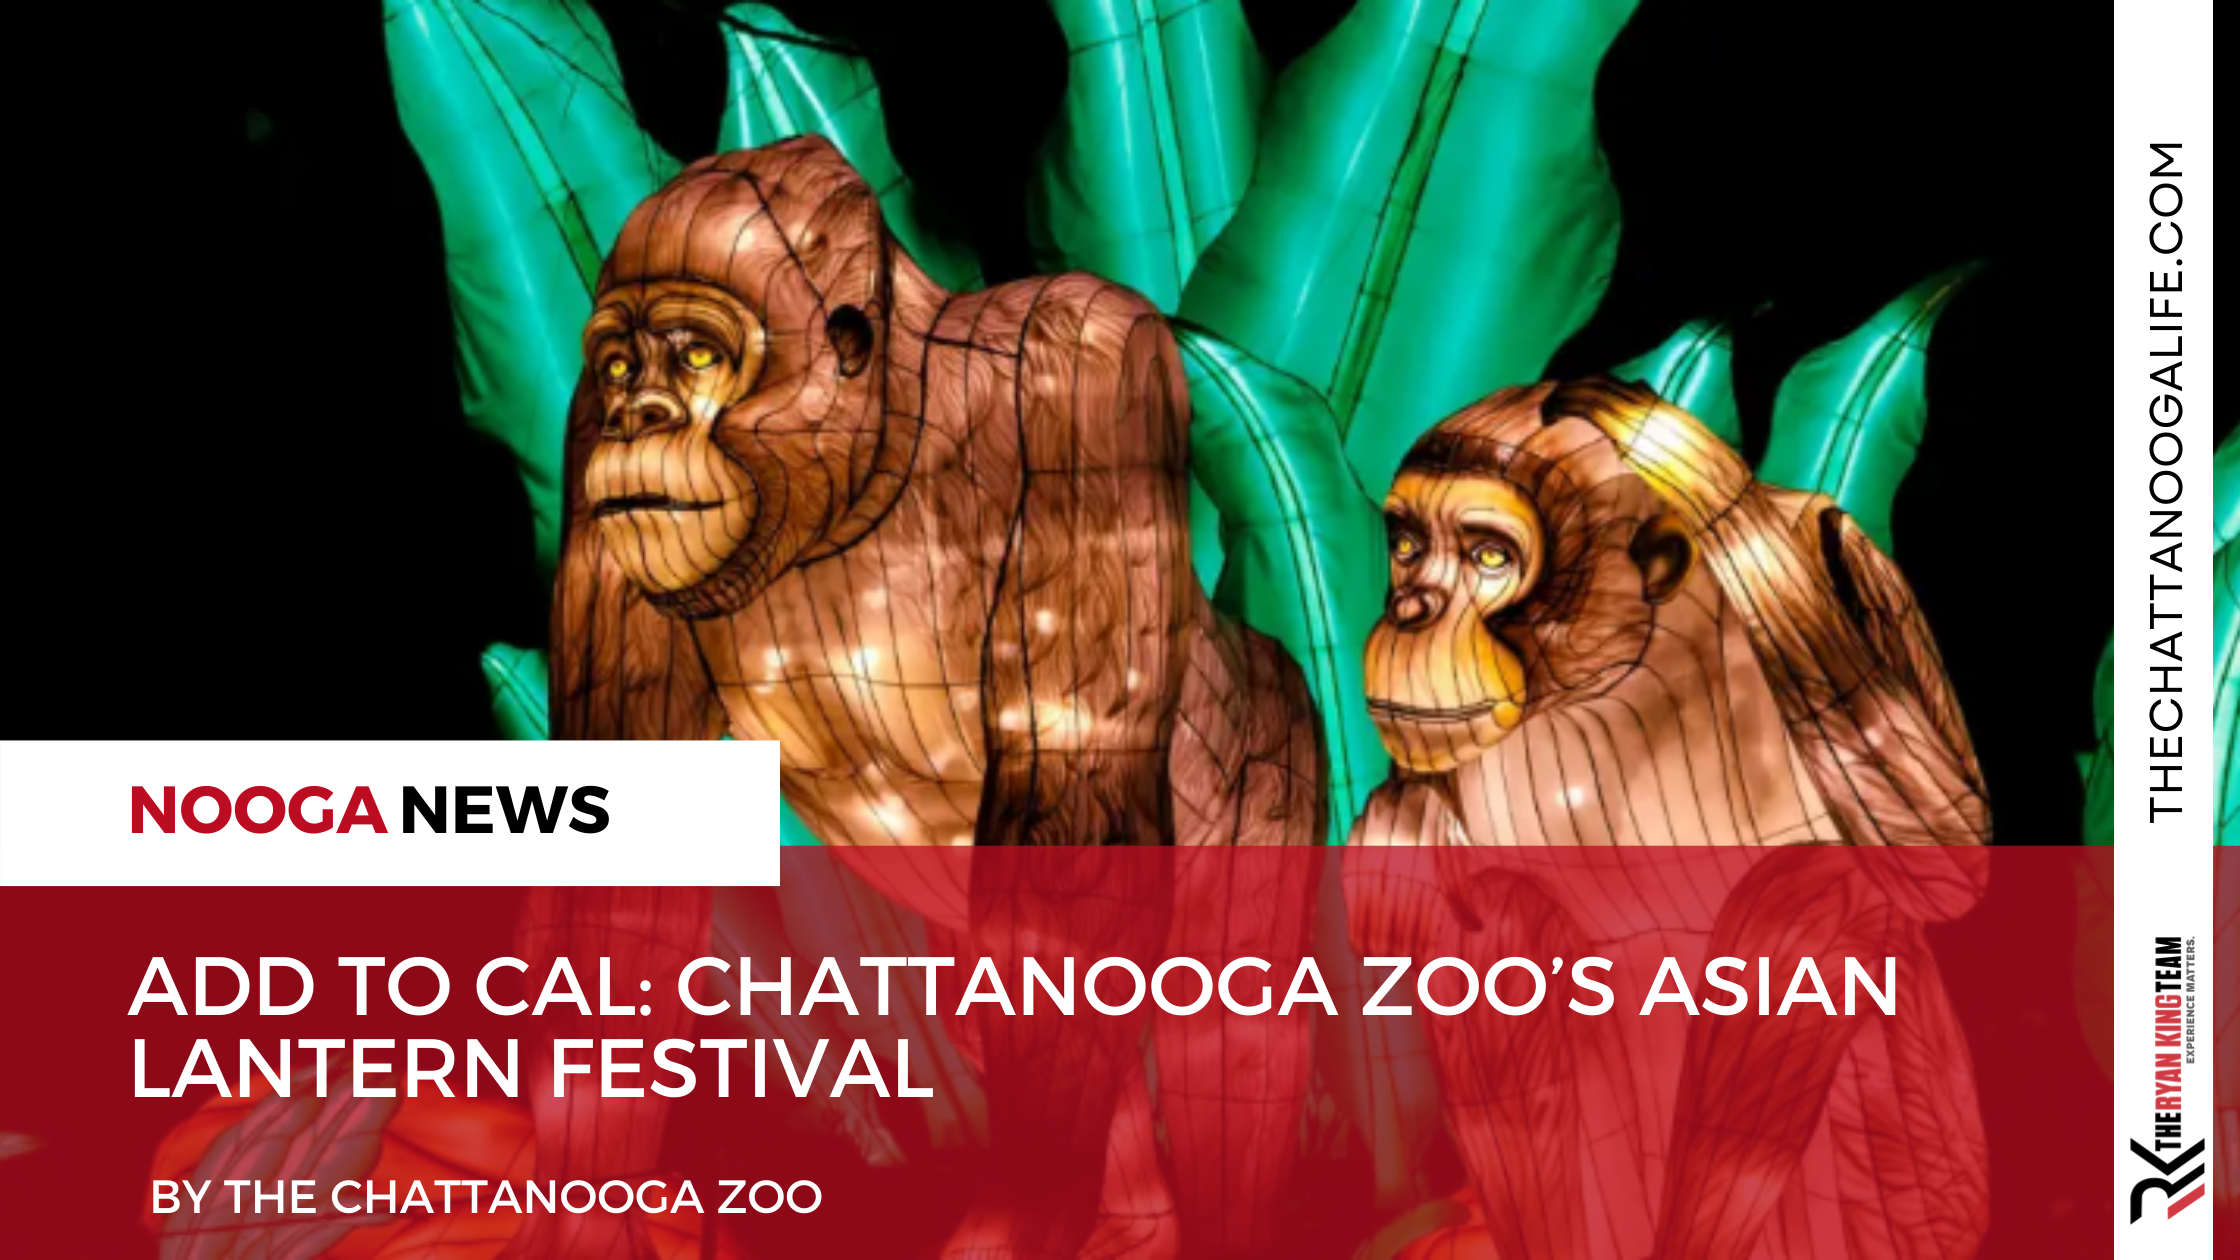 Add to cal: Chattanooga Zoo’s Asian Lantern Festival